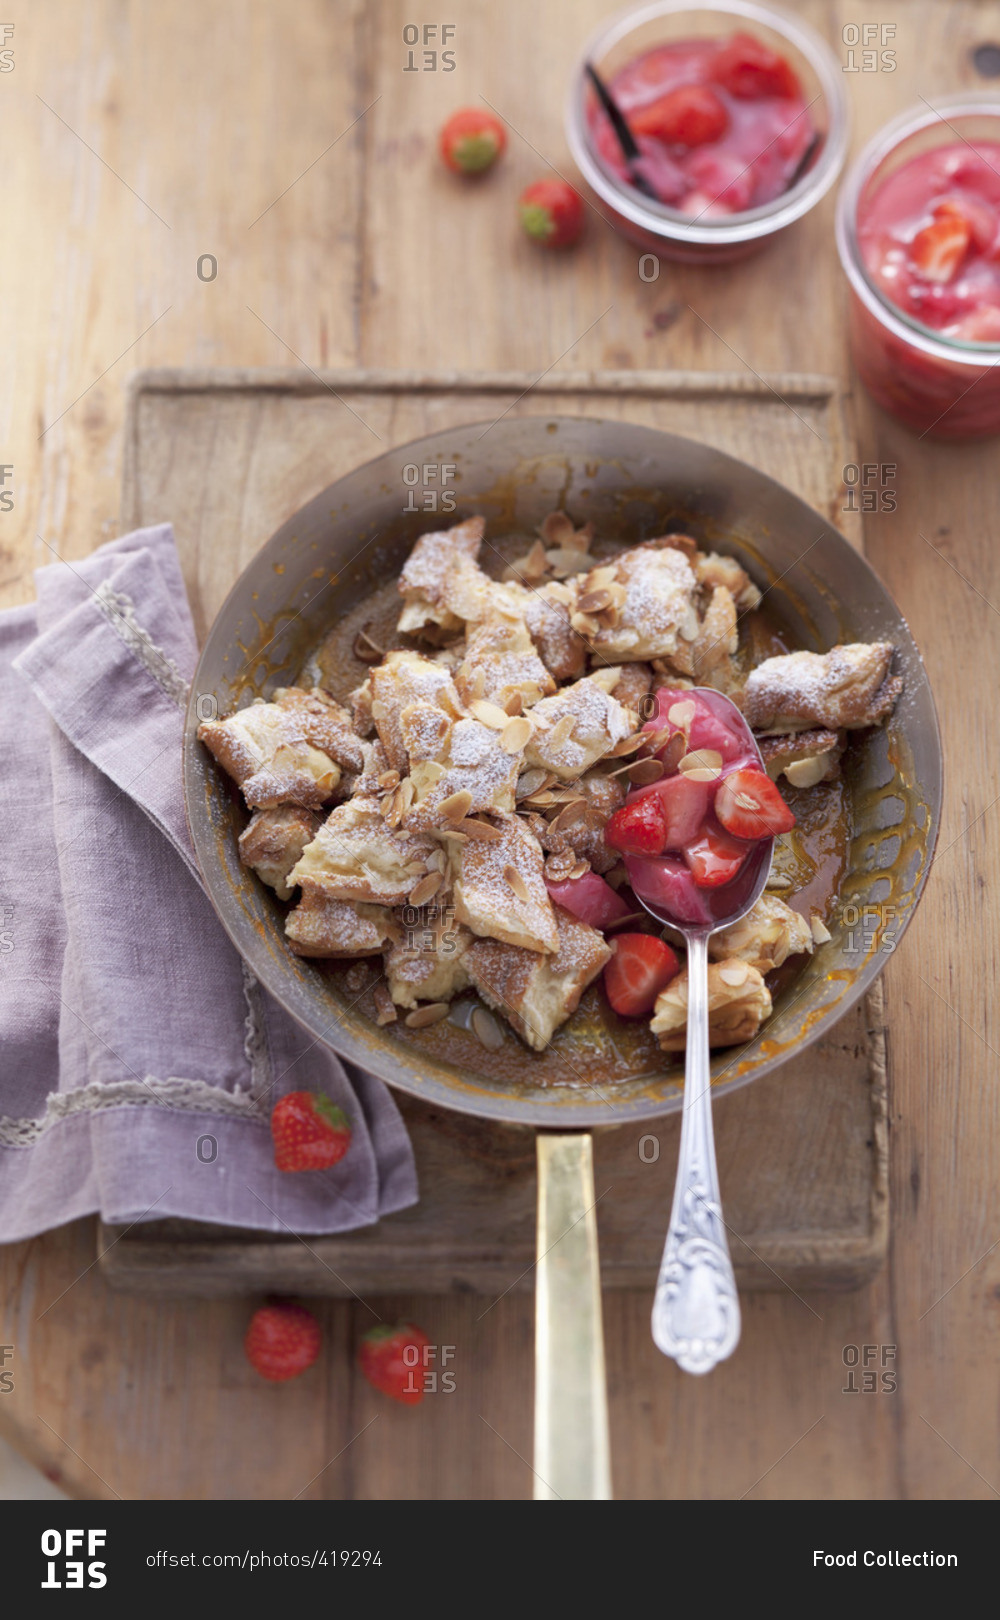 Kaiserschmarrn (shredded sugared pancake from Austria) in a pan with icing sugar, slivered almonds and strawberries, seen from above